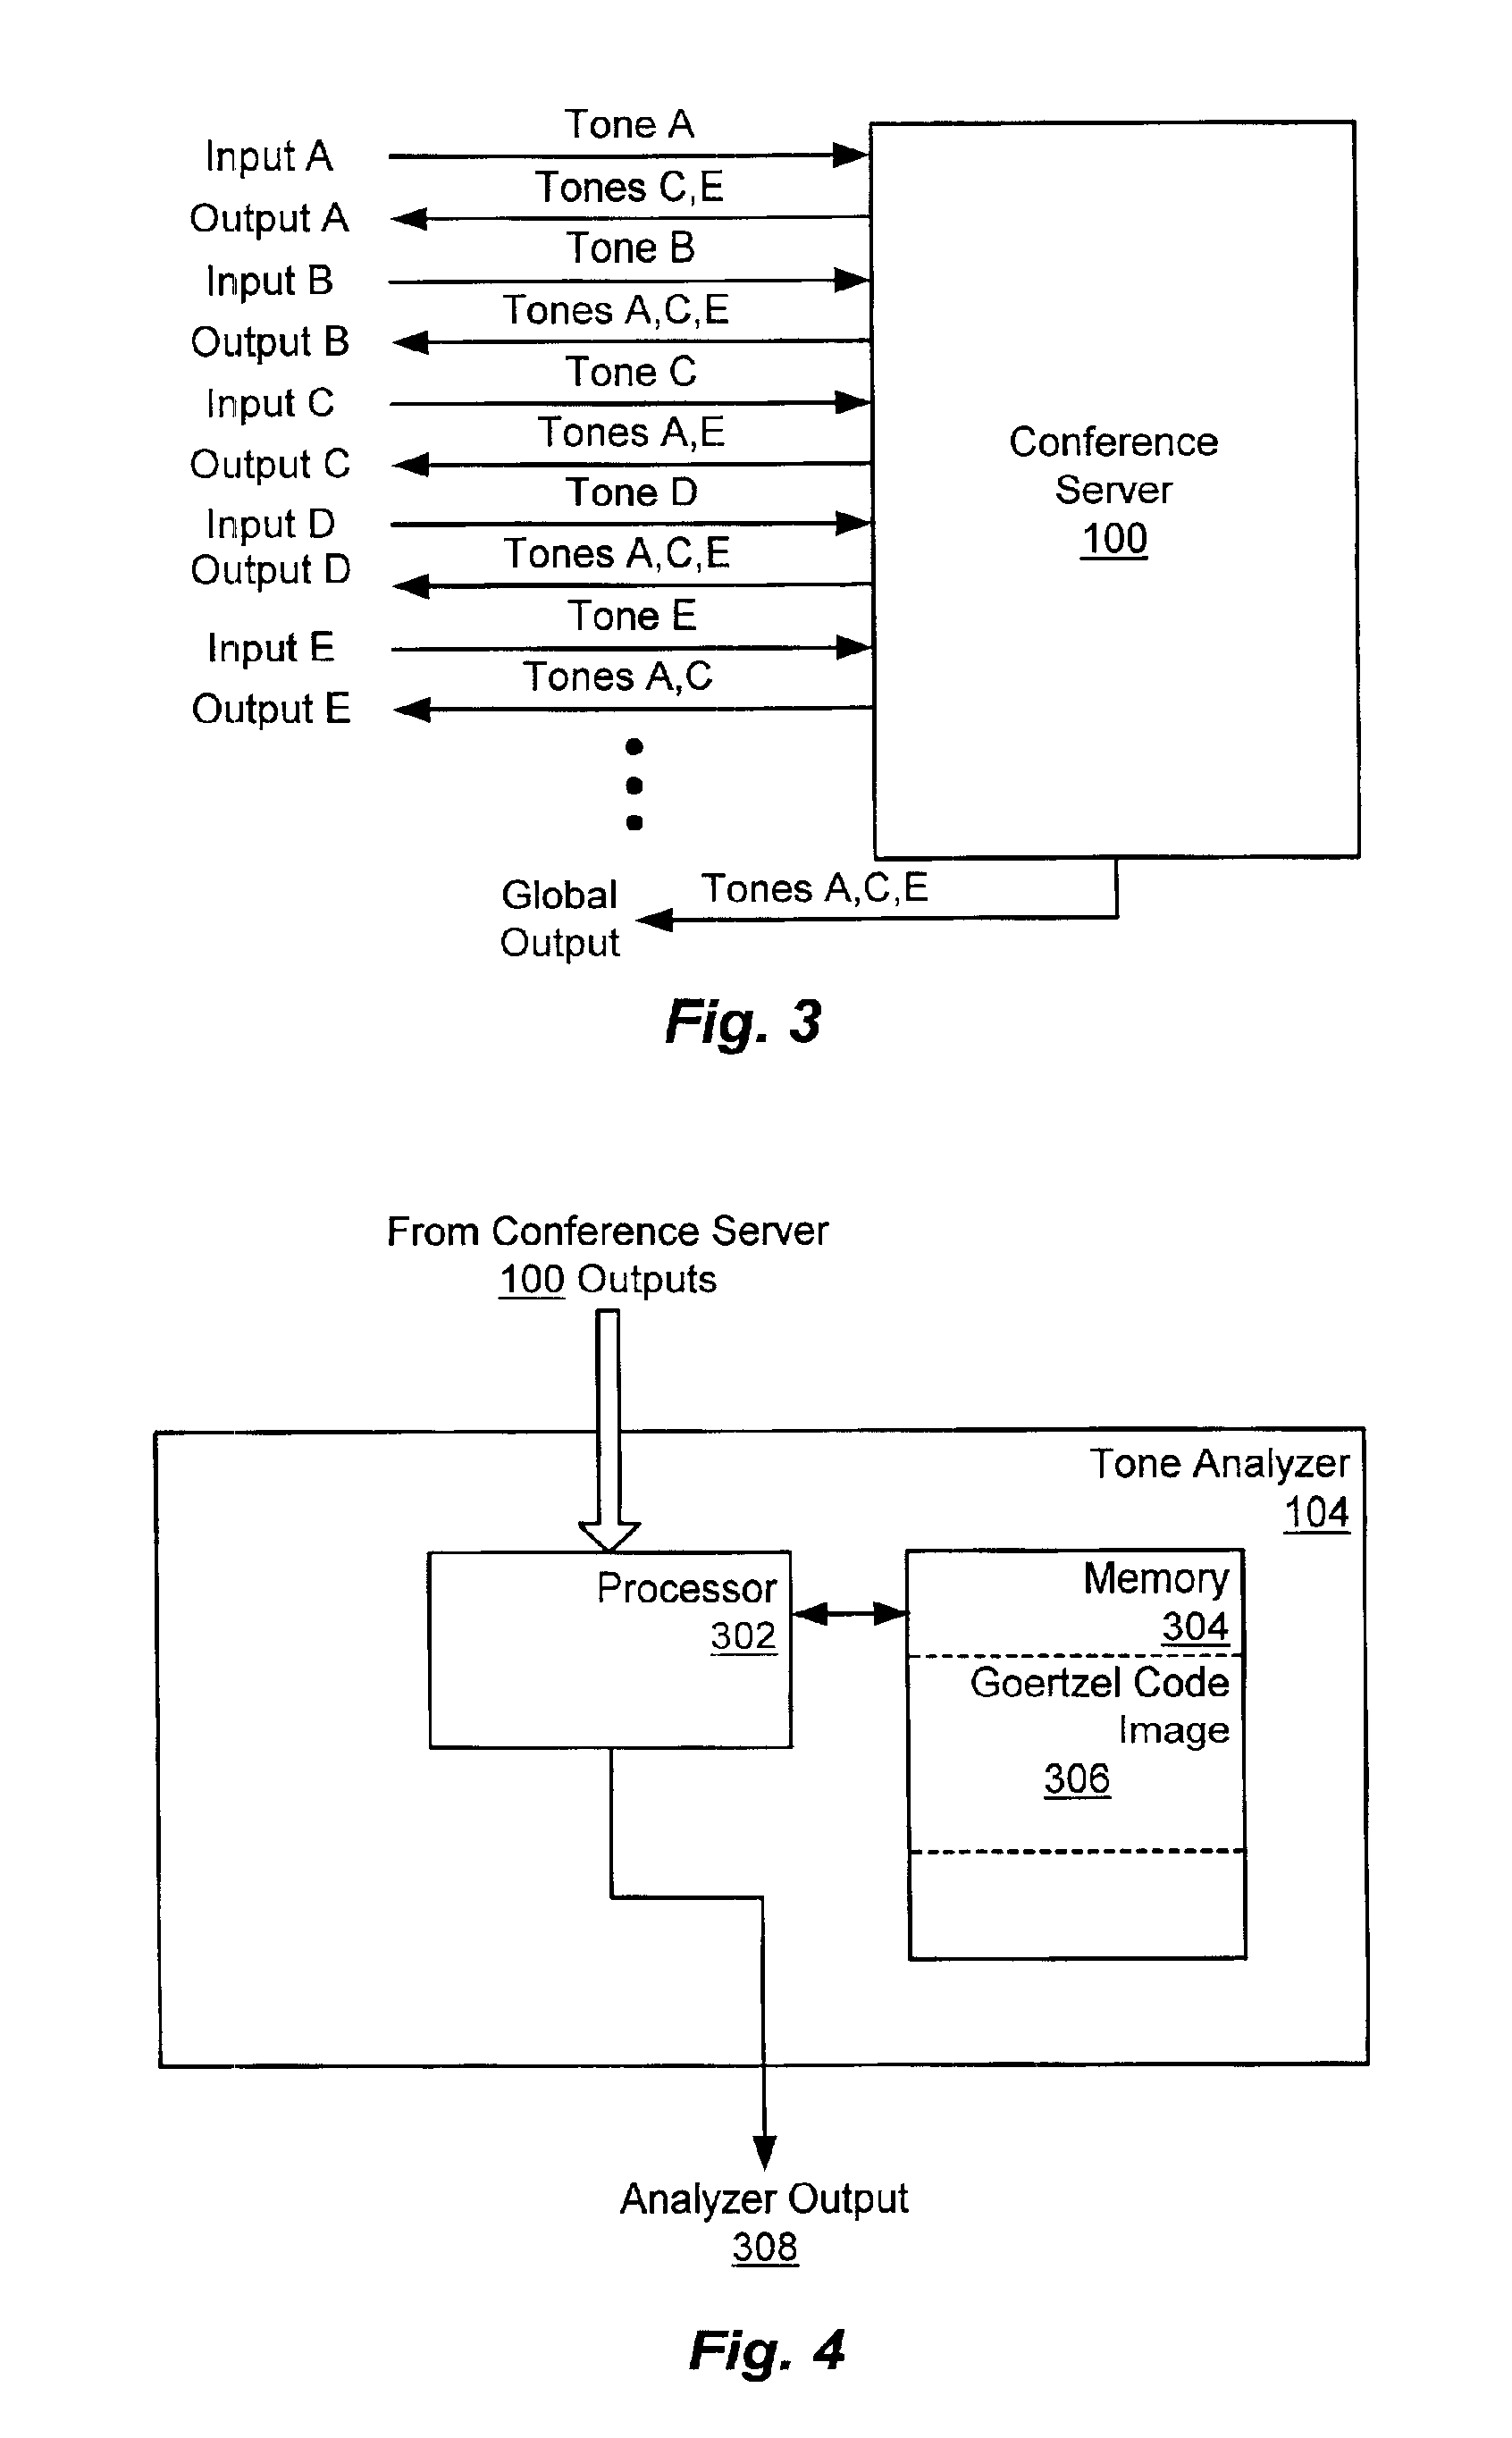 Method for testing large-scale audio conference servers